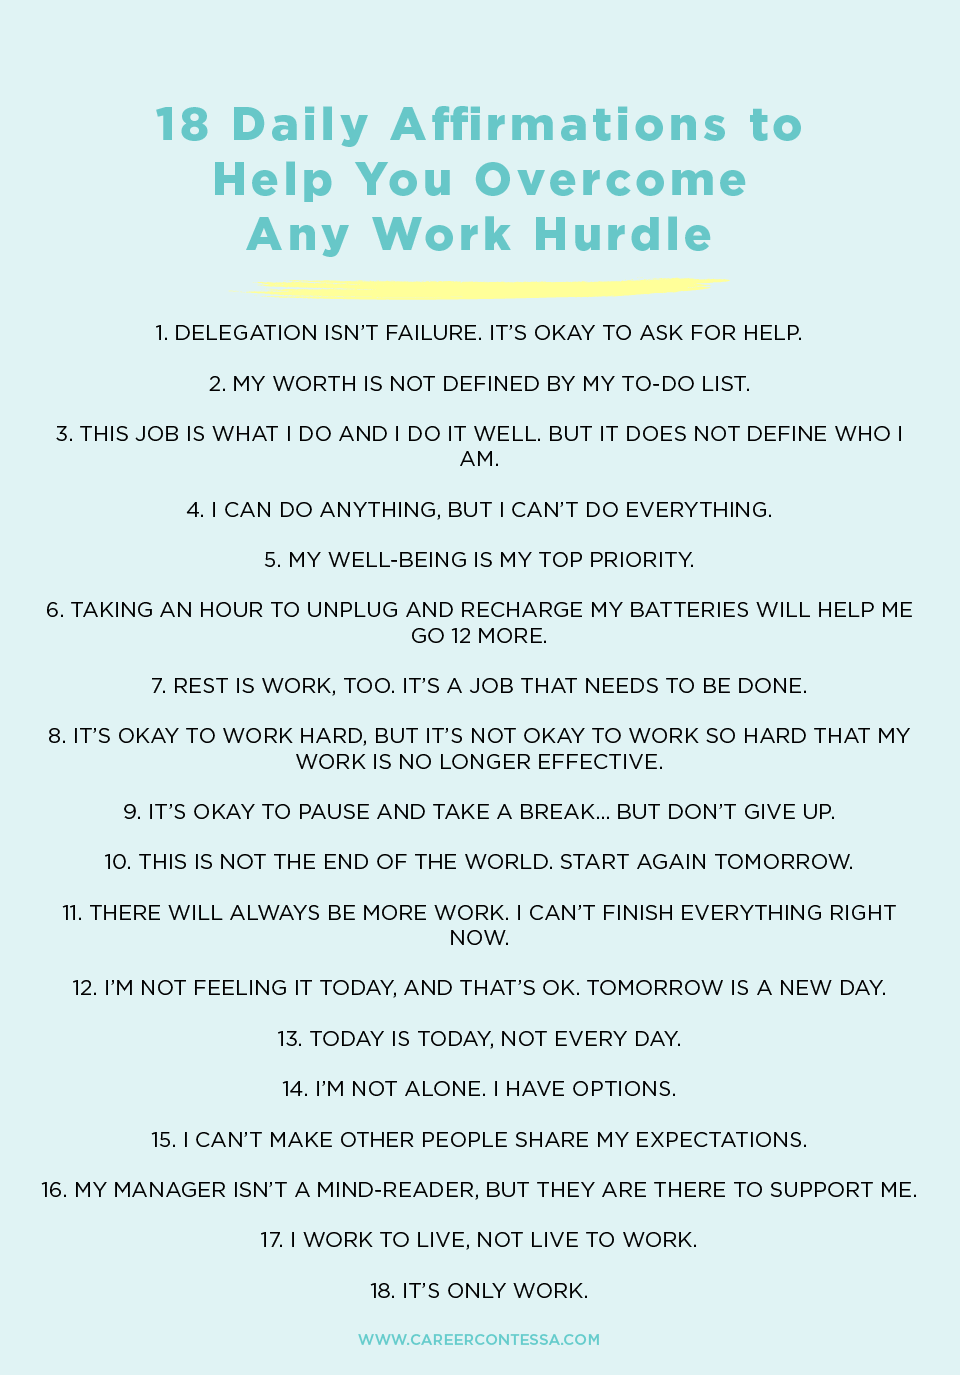 daily affirmations for work stress